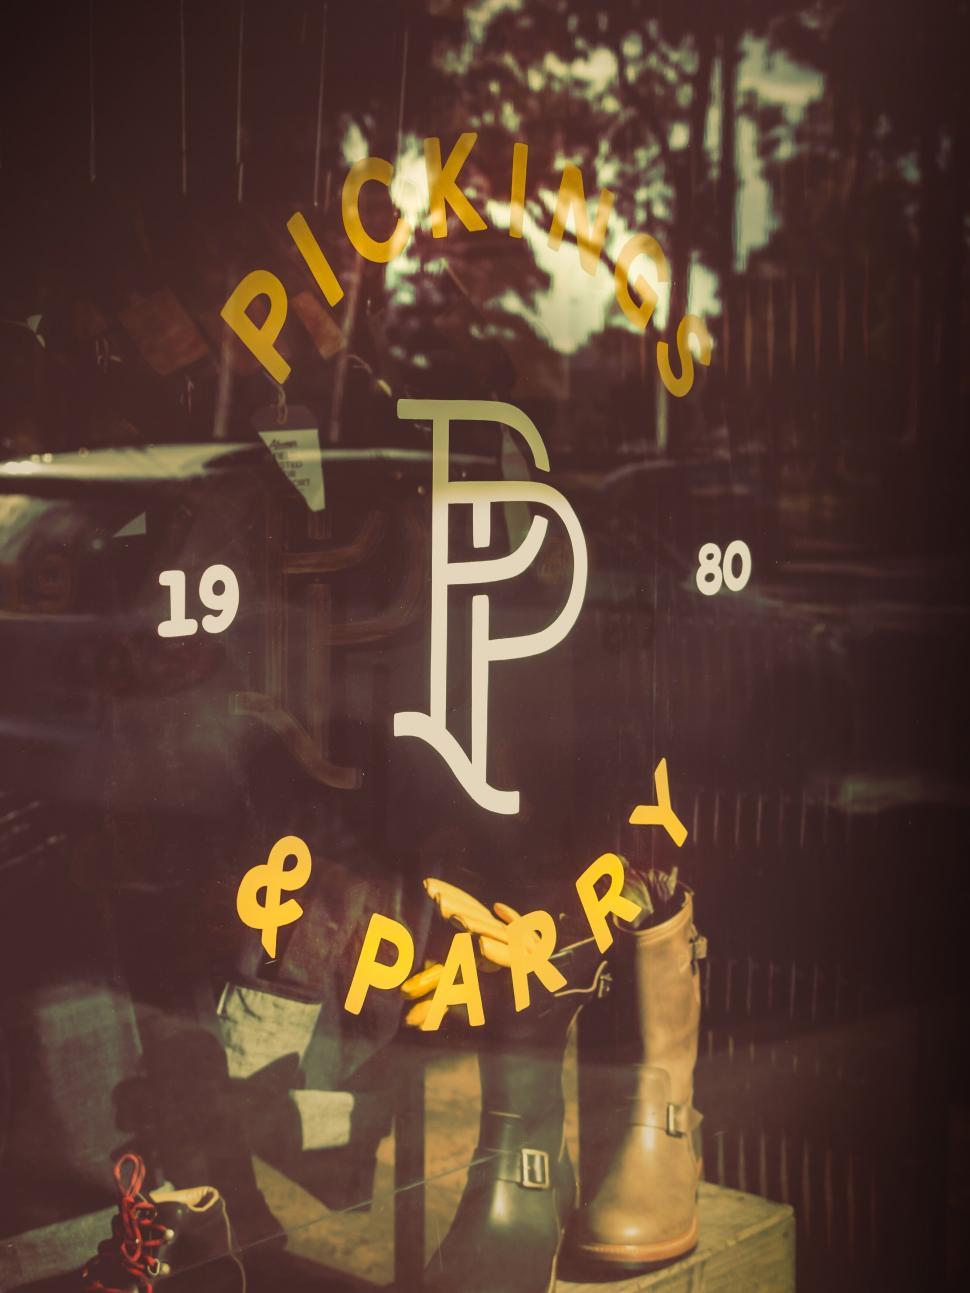 Free Image of Vintage shop front with gold lettering 